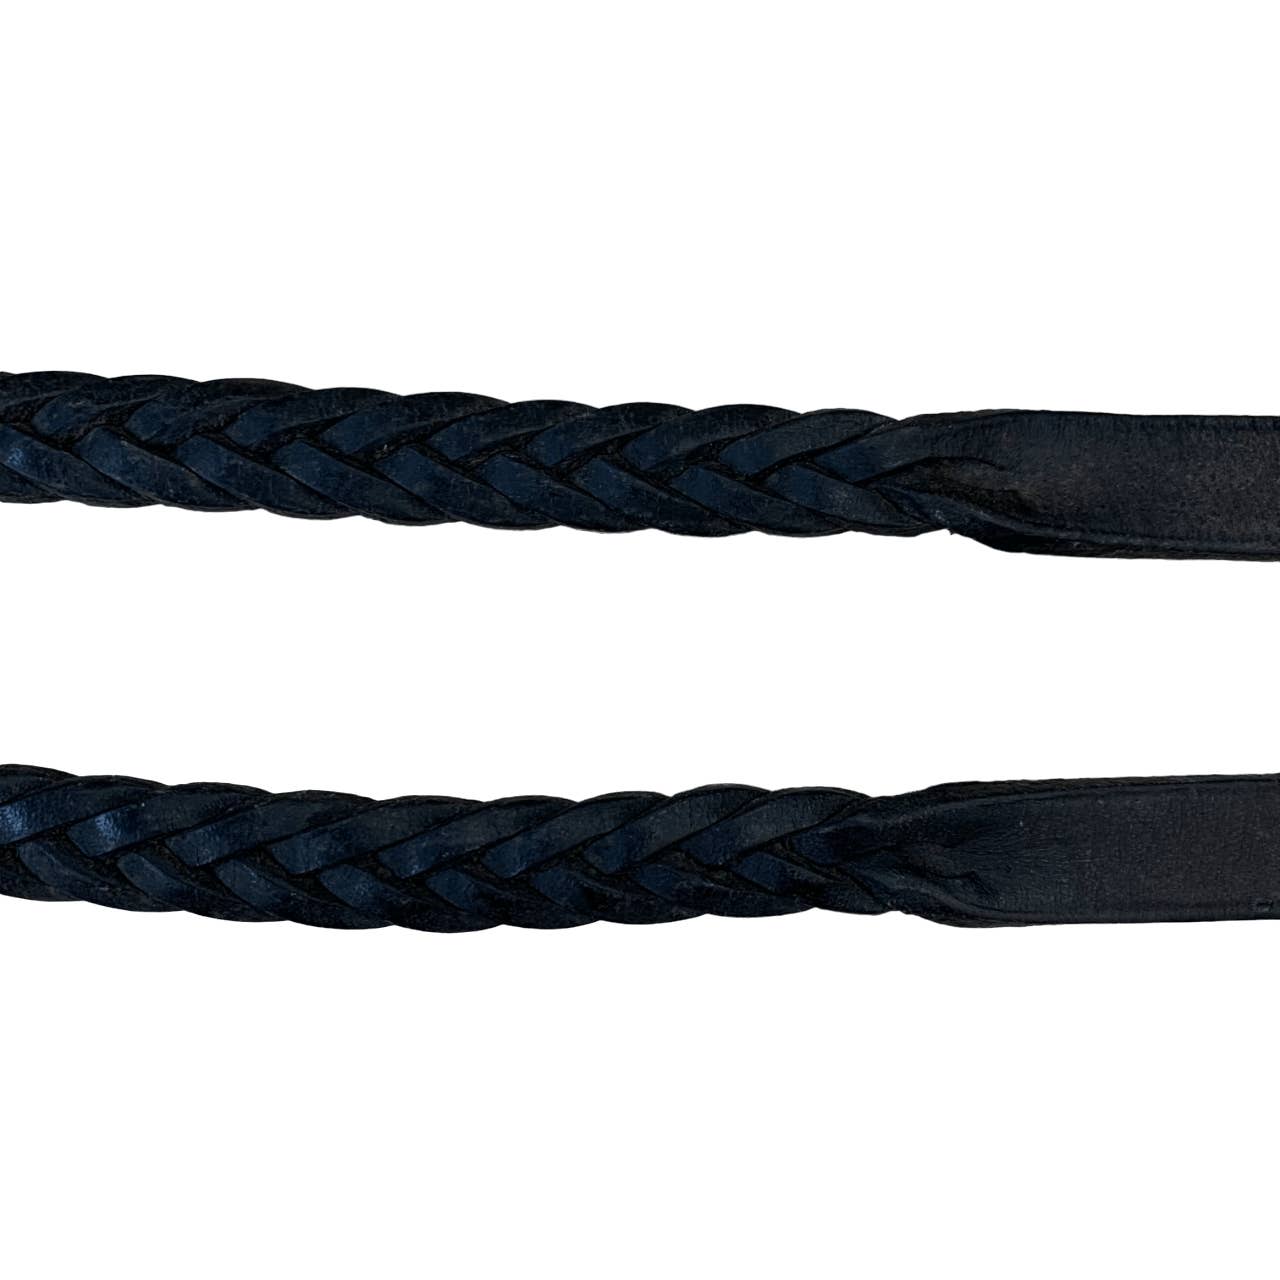 Tory Leather Plaited English Reins in Brown - 64"